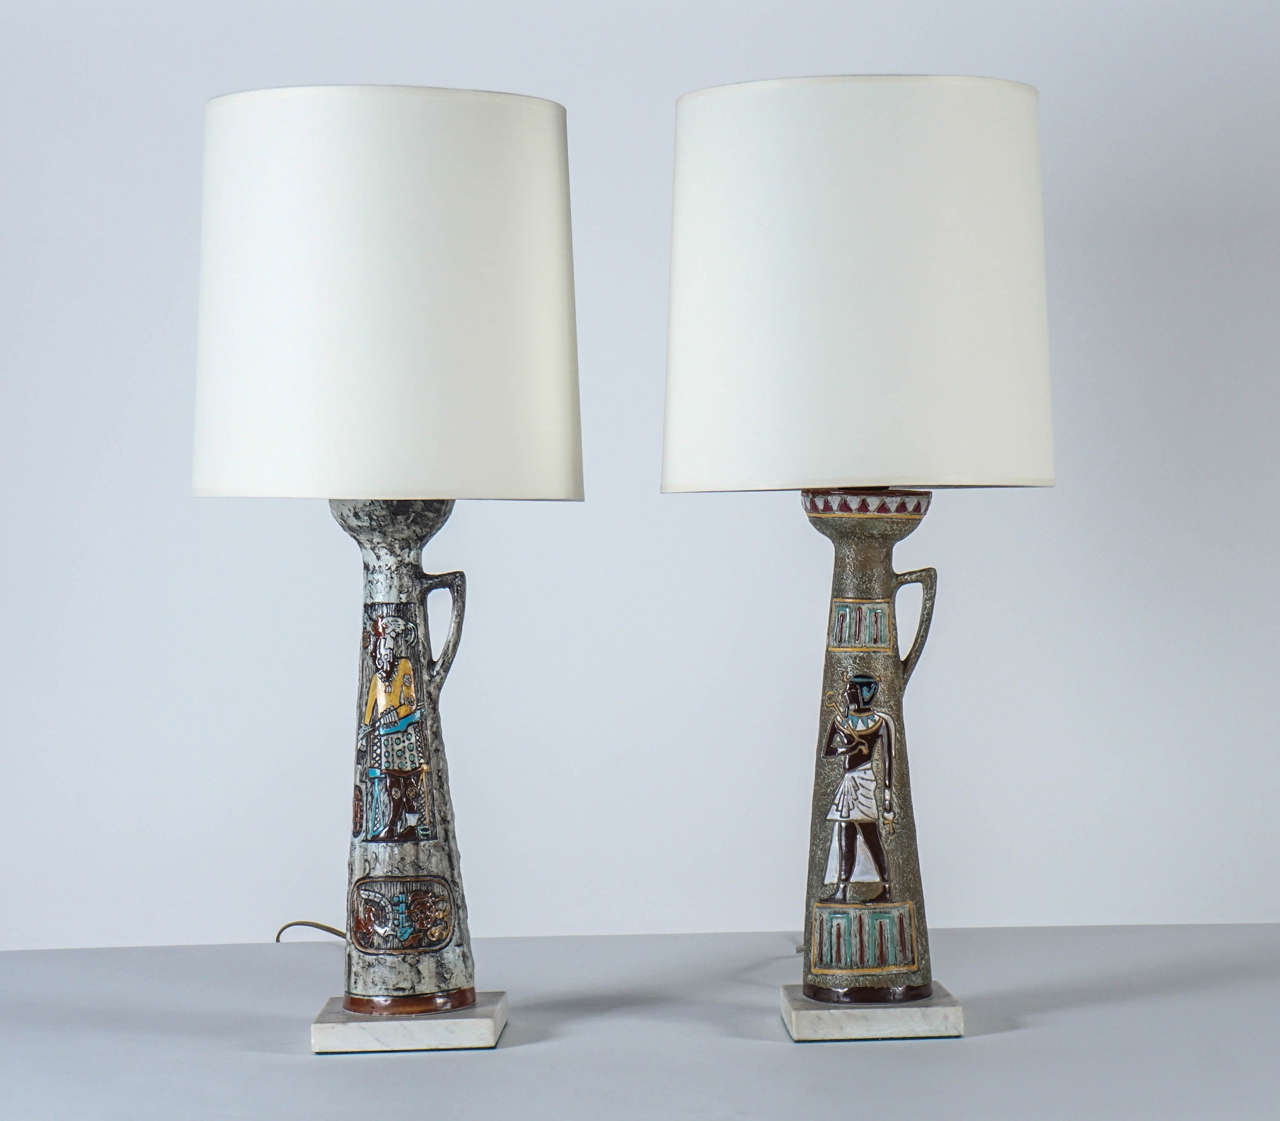 Egyptian-motif ewer-form bases: different hieroglyphic figures are depicted on each lamp in chocolate, mustard, and turquoise against a dove gray lava-glaze ground. White marble bases. Newly rewired with 3-way sockets. Ivory paper shades included.